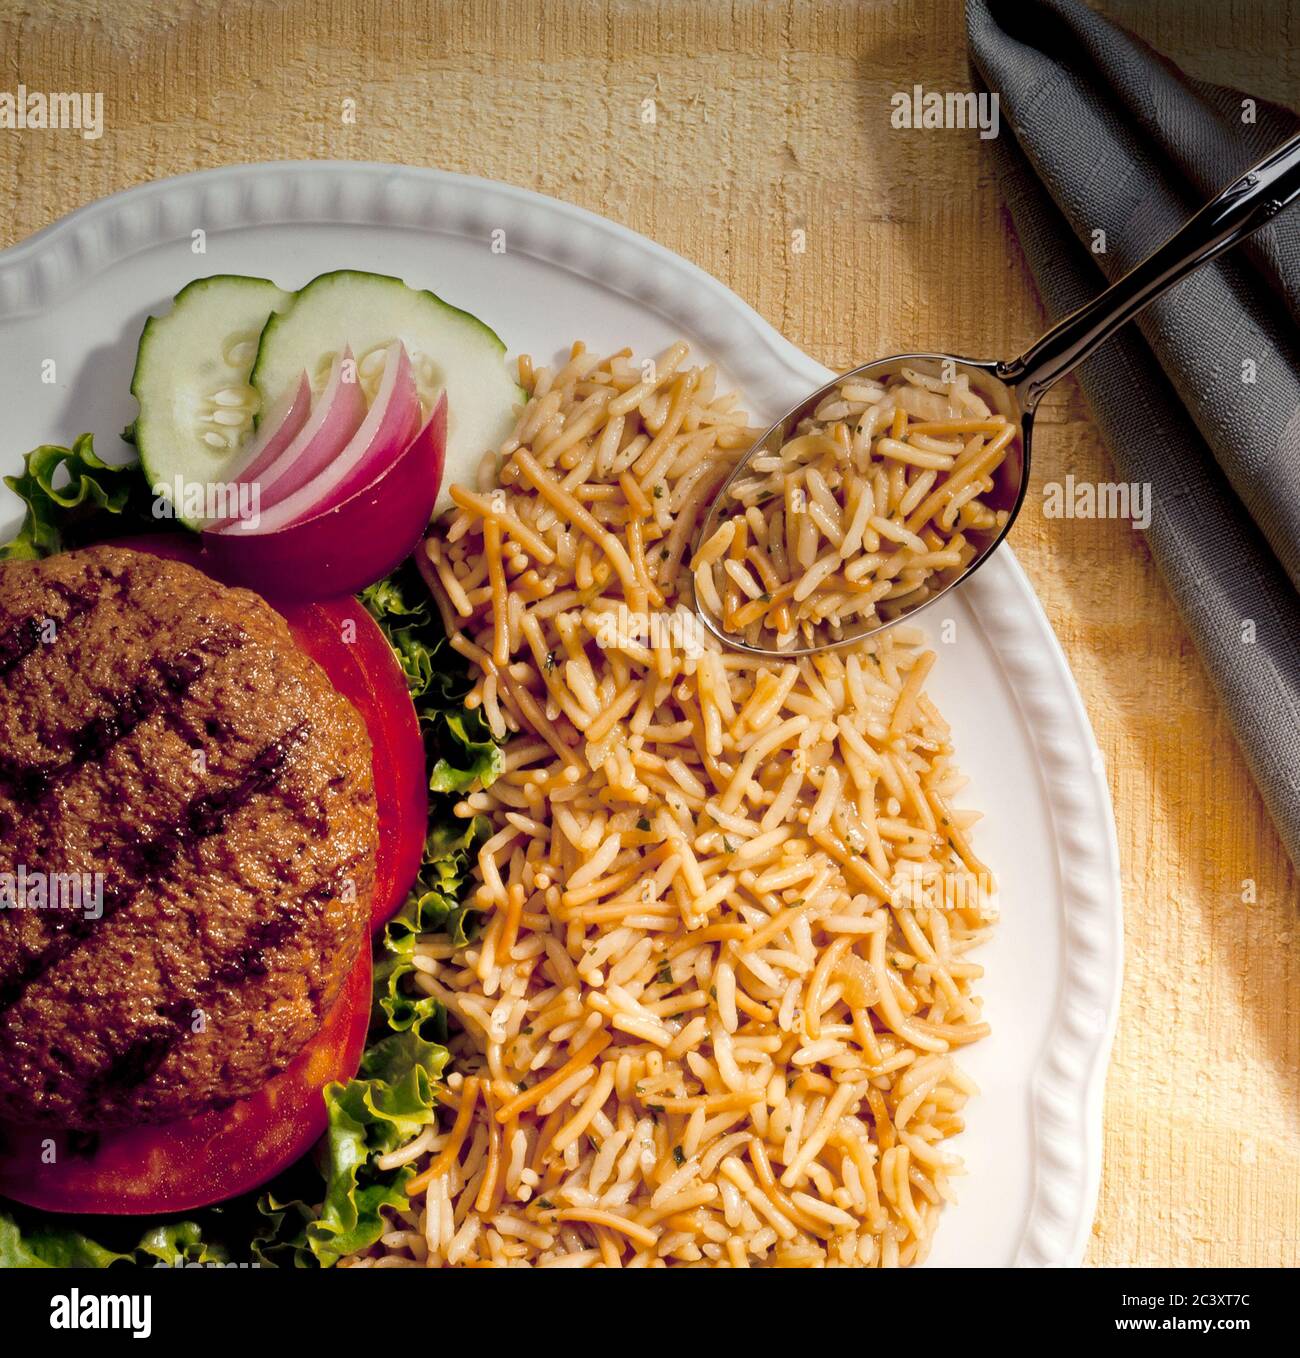 Grilled Hamburger and Rice Plate Stock Photo